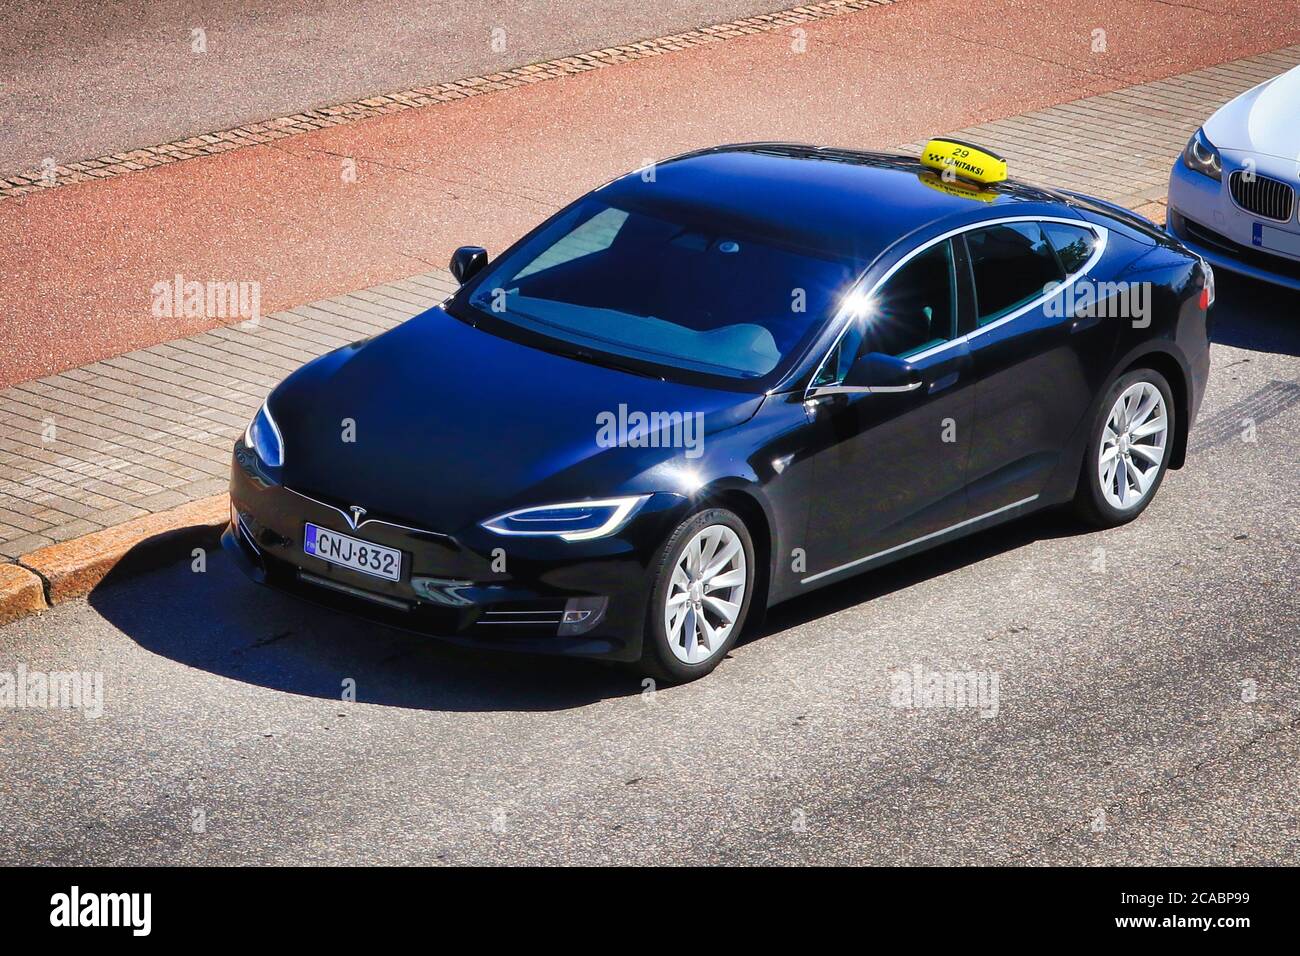 Tesla Model S electric car taxi waiting for passengers from Tallink Silja car ferry in Olympia Terminal, Port of Helsinki, Finland. July 6, 2020. Stock Photo